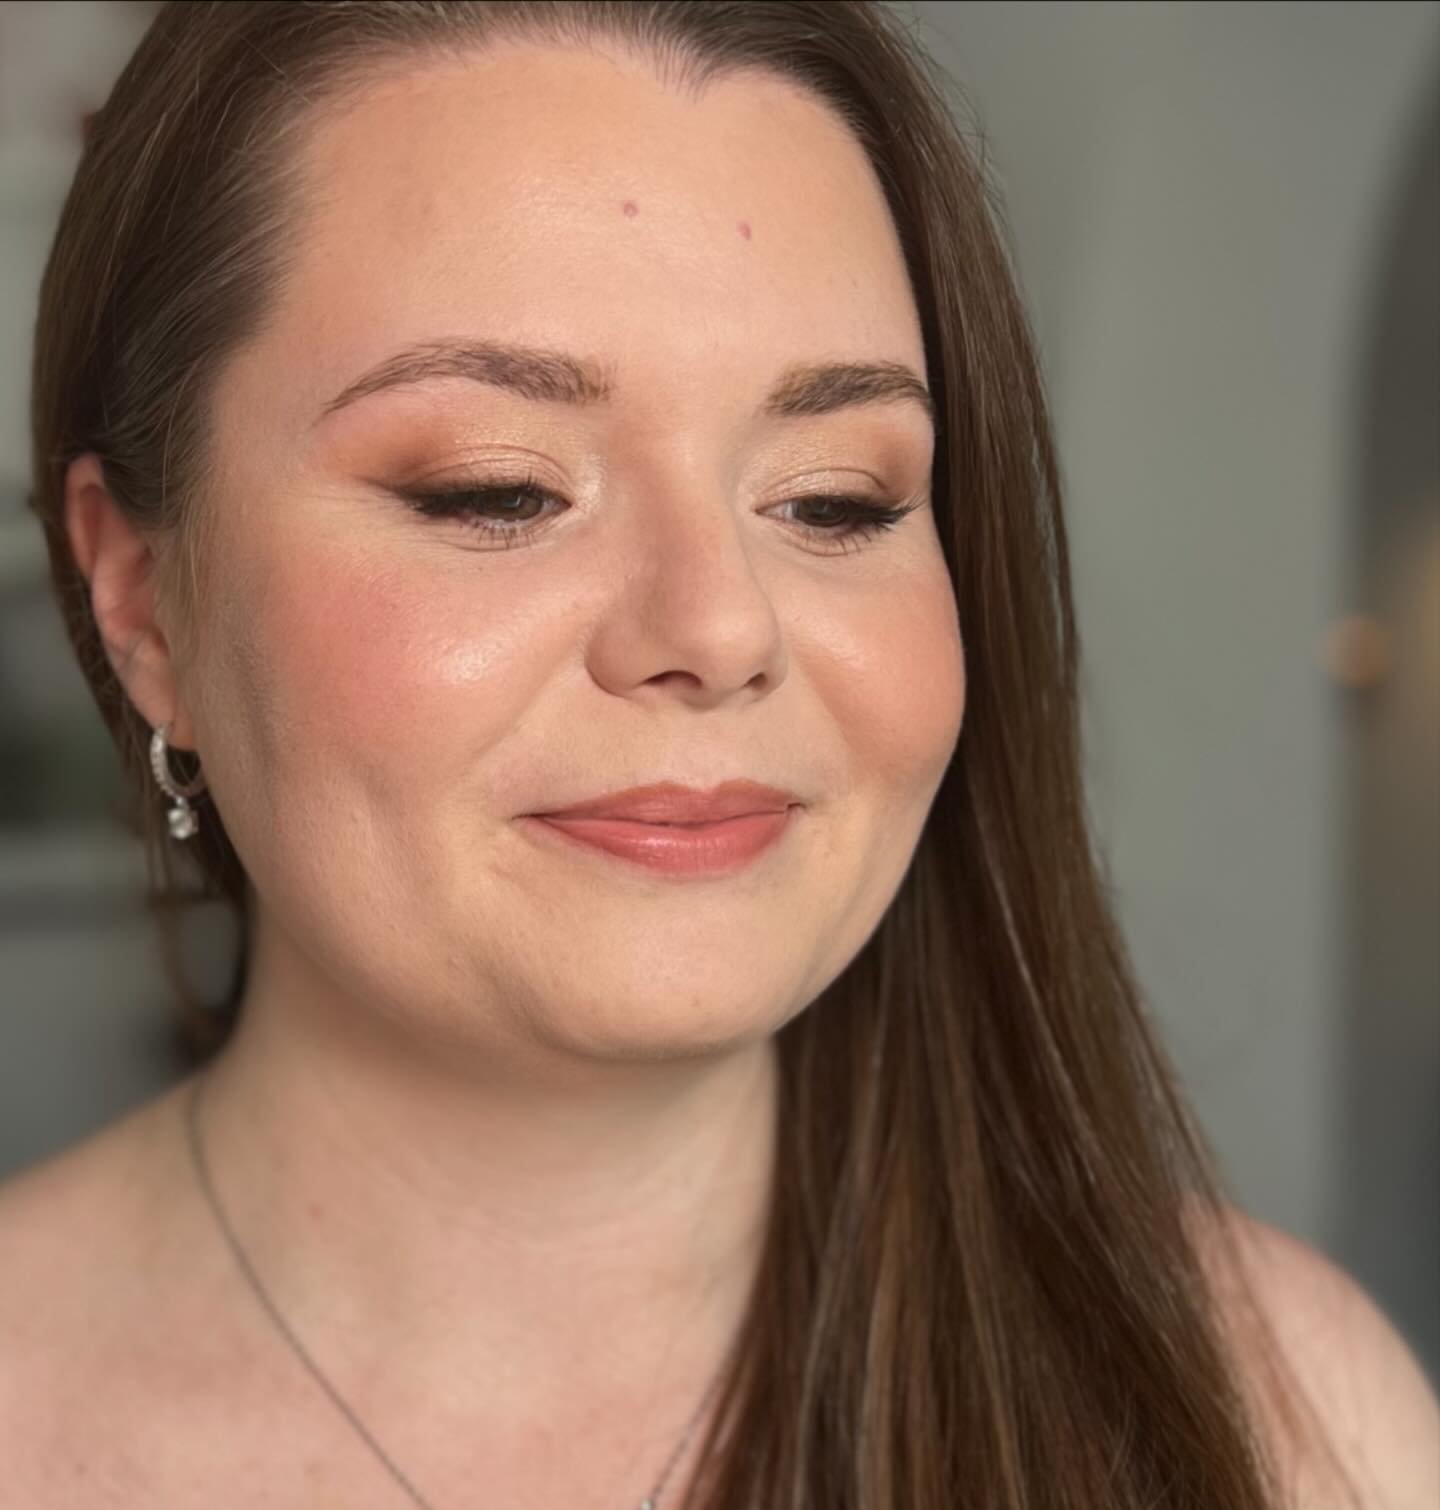 From Bridal Preview to Big Day ✨
More of beautiful Emily from her January trial and the final look on her wedding day last Saturday ✨

Emily has the most beautiful cheeks so l used a real cocktail of highlight and blush to really make them a focus: @